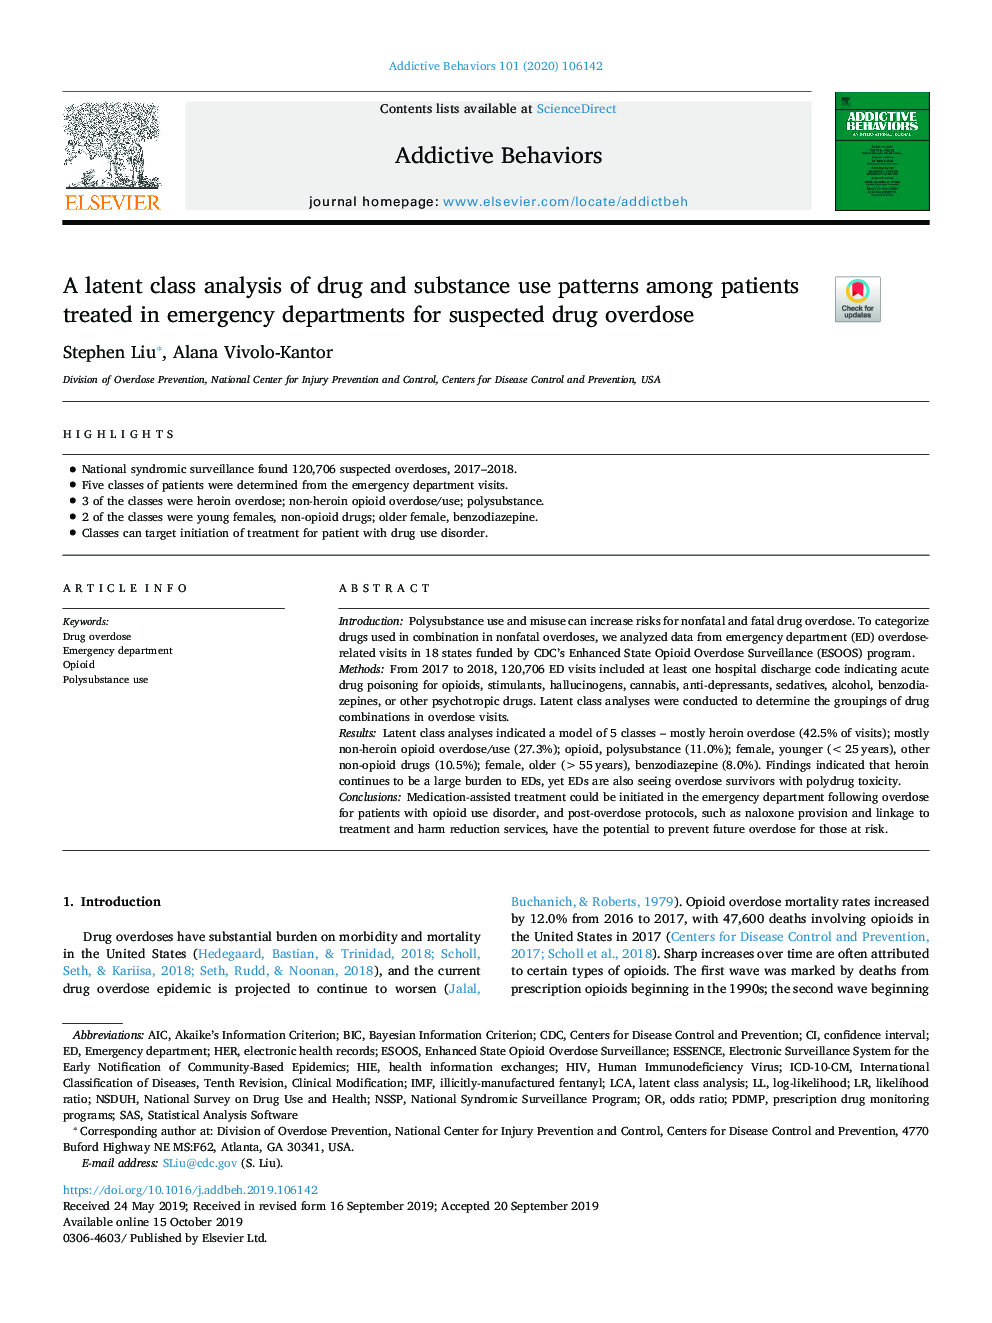 A latent class analysis of drug and substance use patterns among patients treated in emergency departments for suspected drug overdose